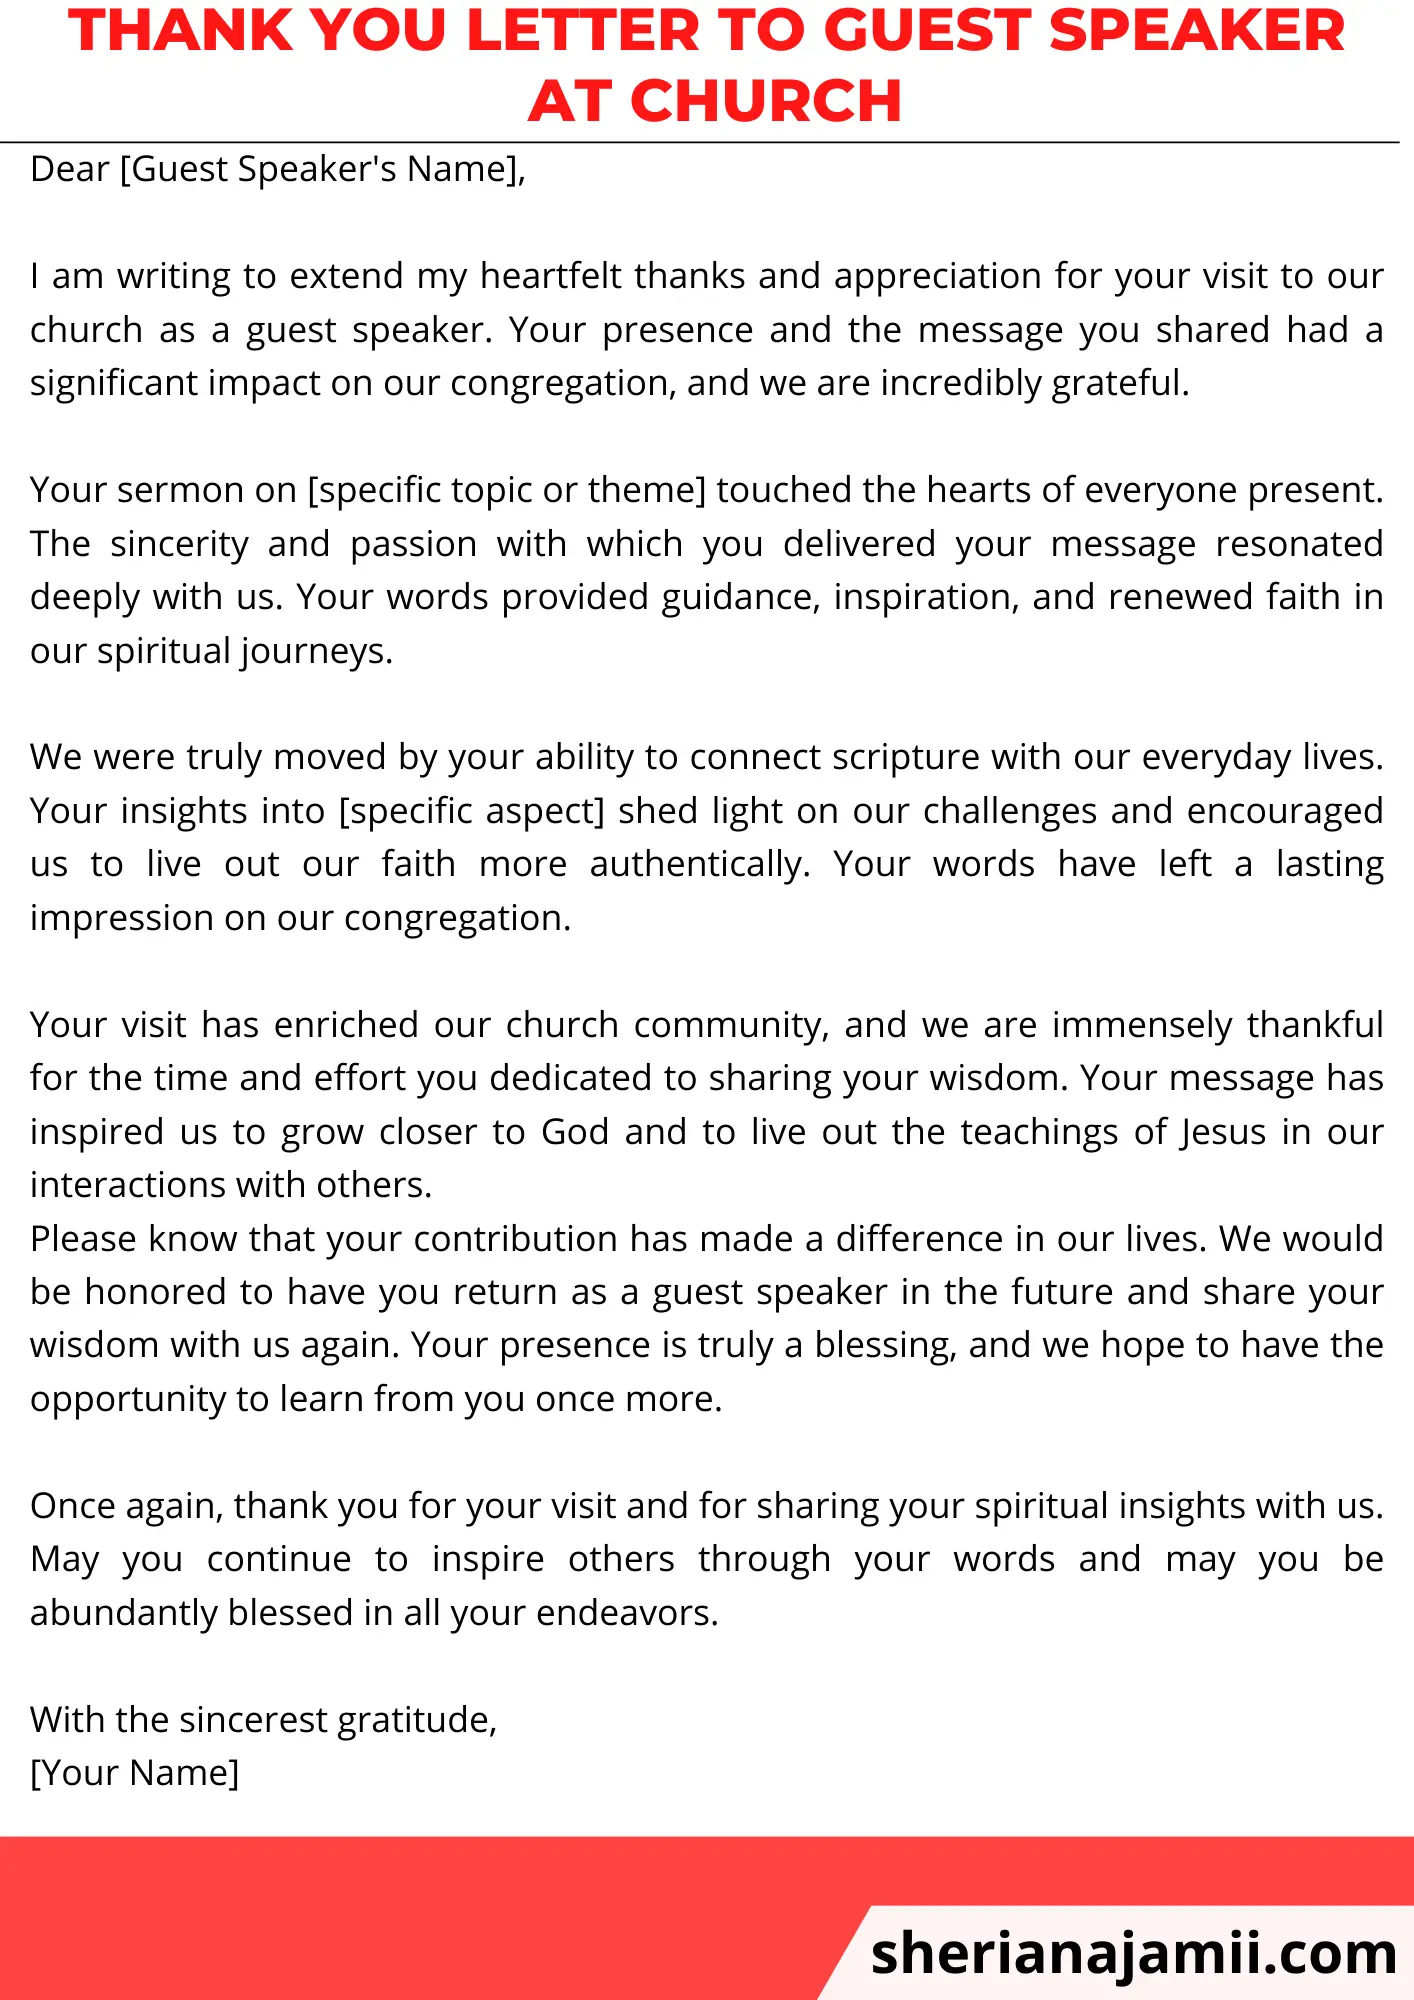 thank you letter to guest speaker at church